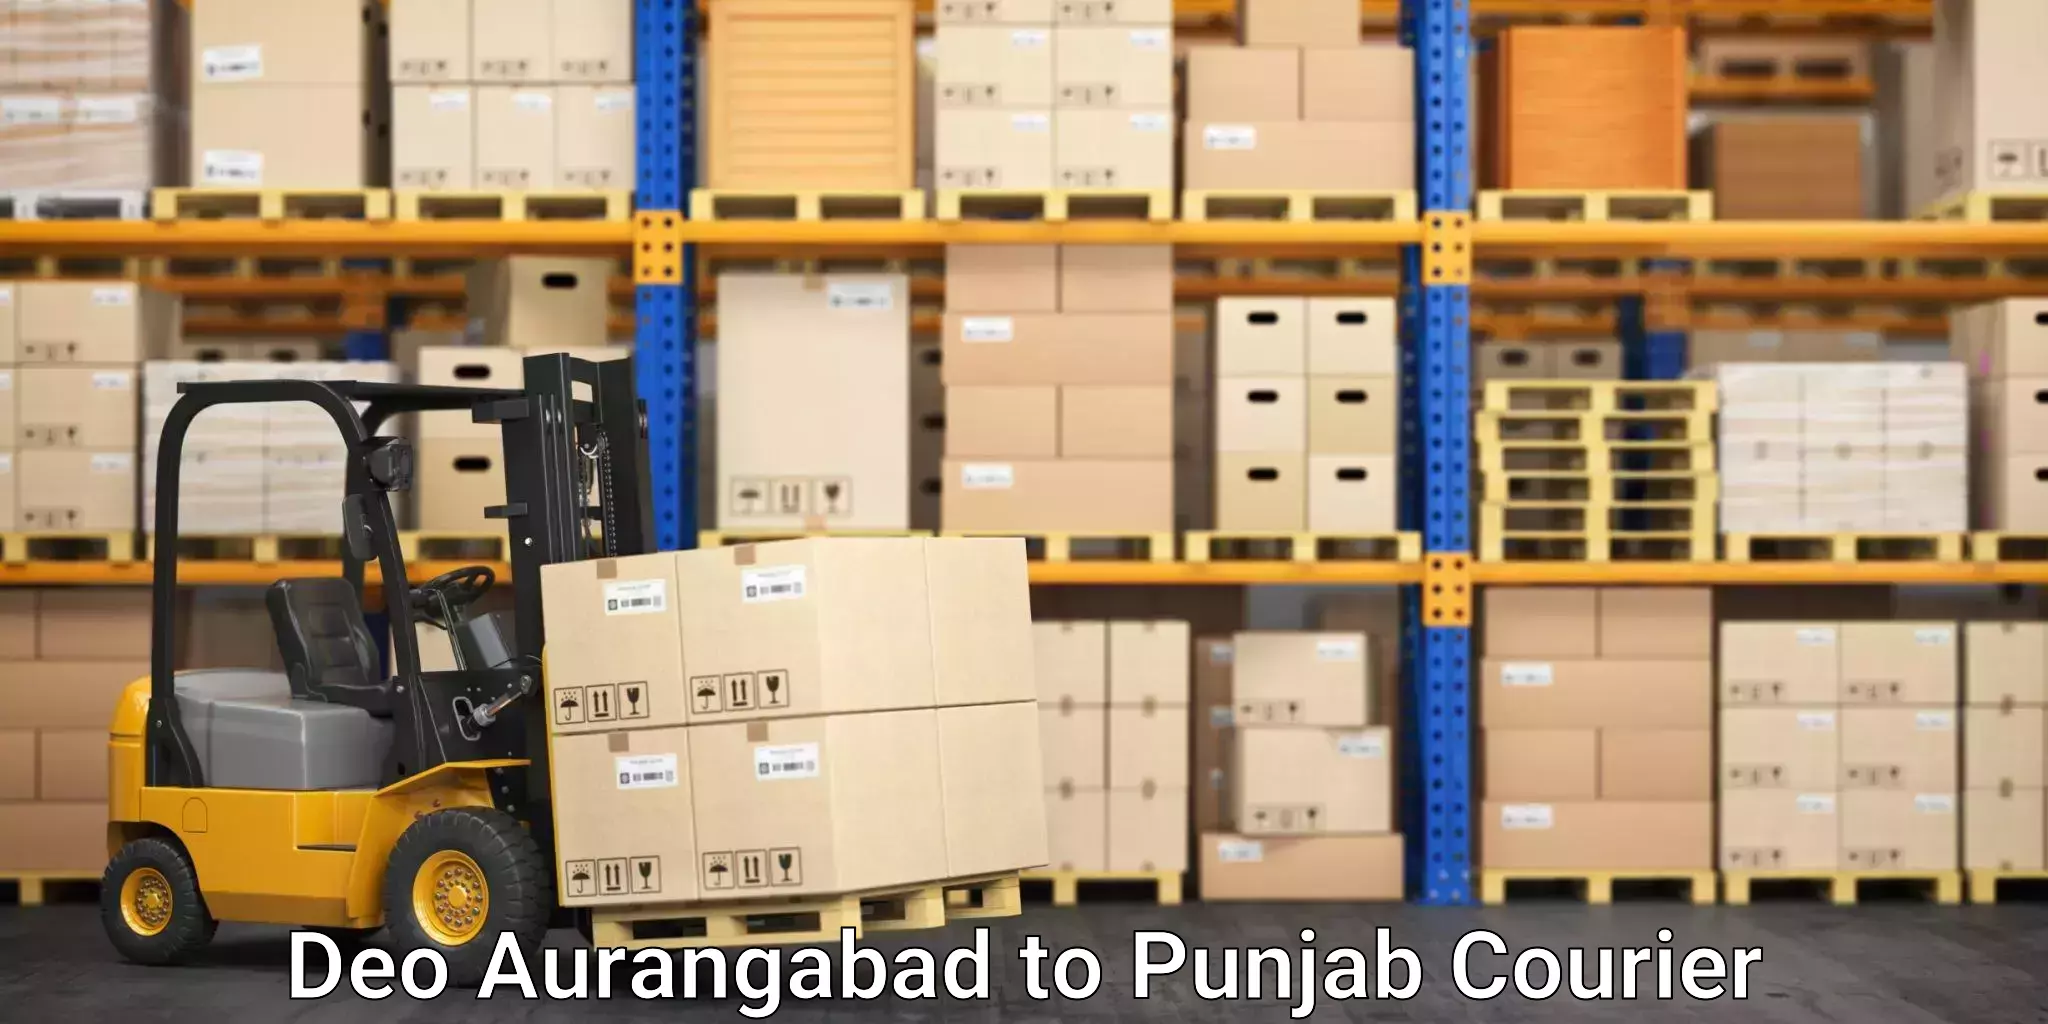 Household moving experts Deo Aurangabad to Phillaur